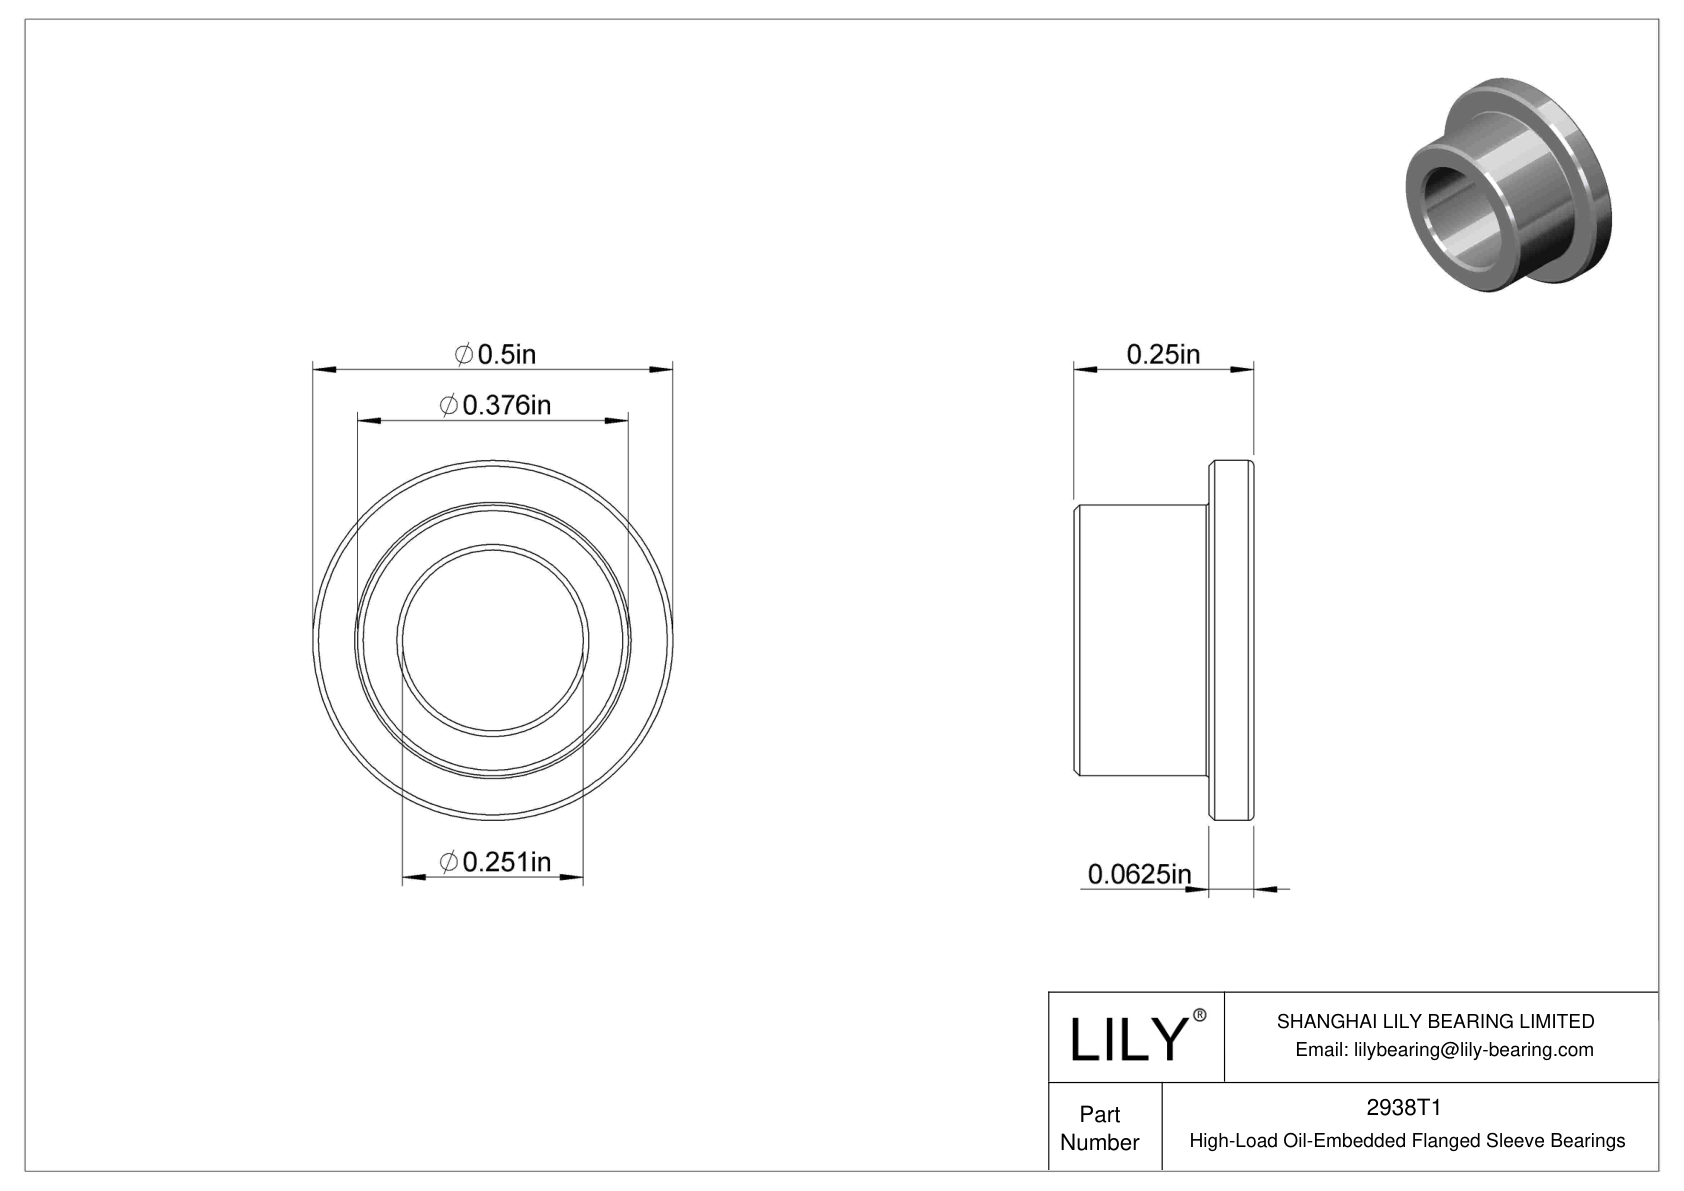 CJDITB High-Load Oil-Embedded Flanged Sleeve Bearings cad drawing